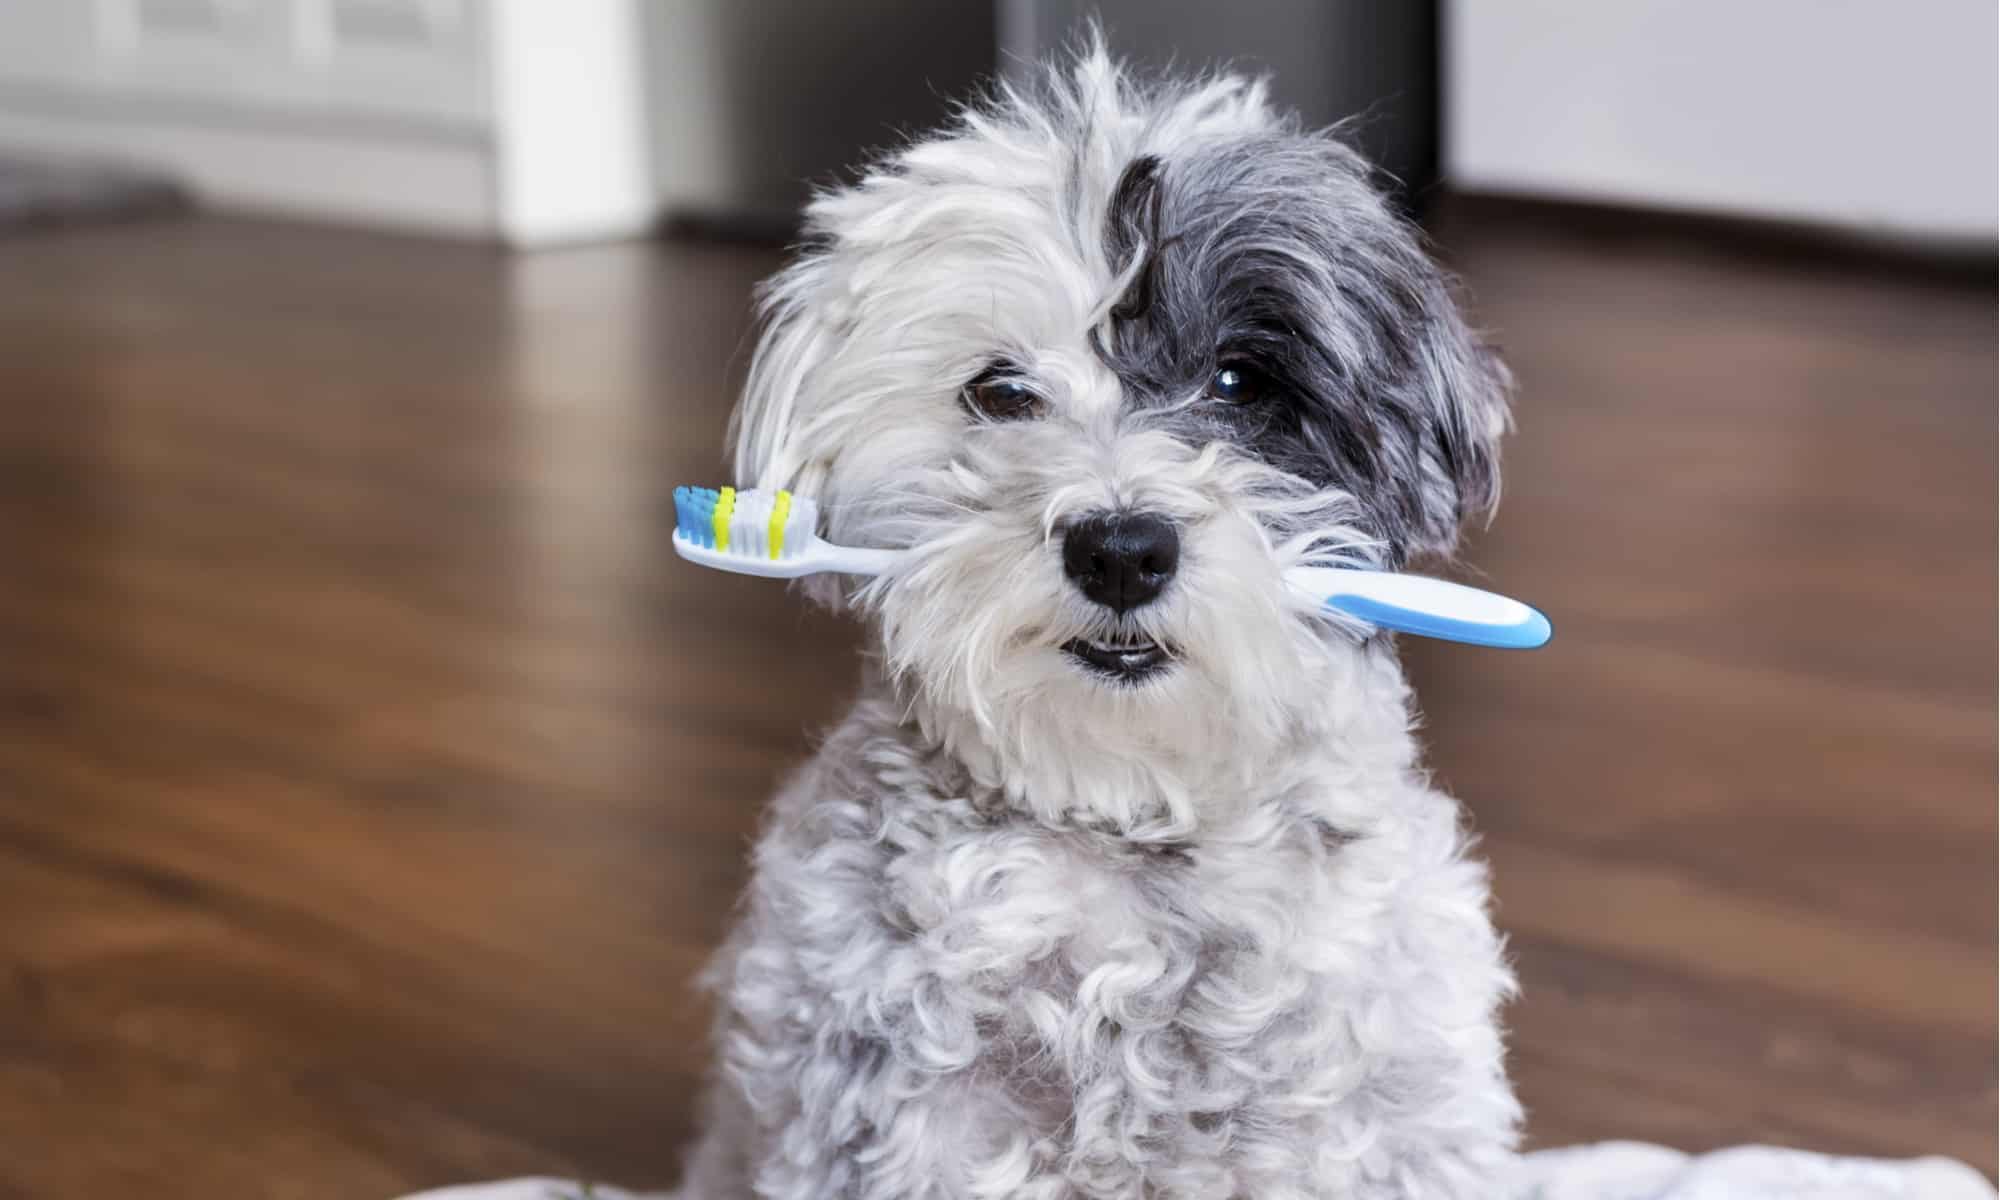 A poodle dog poses with a toothbrush in the mouth.